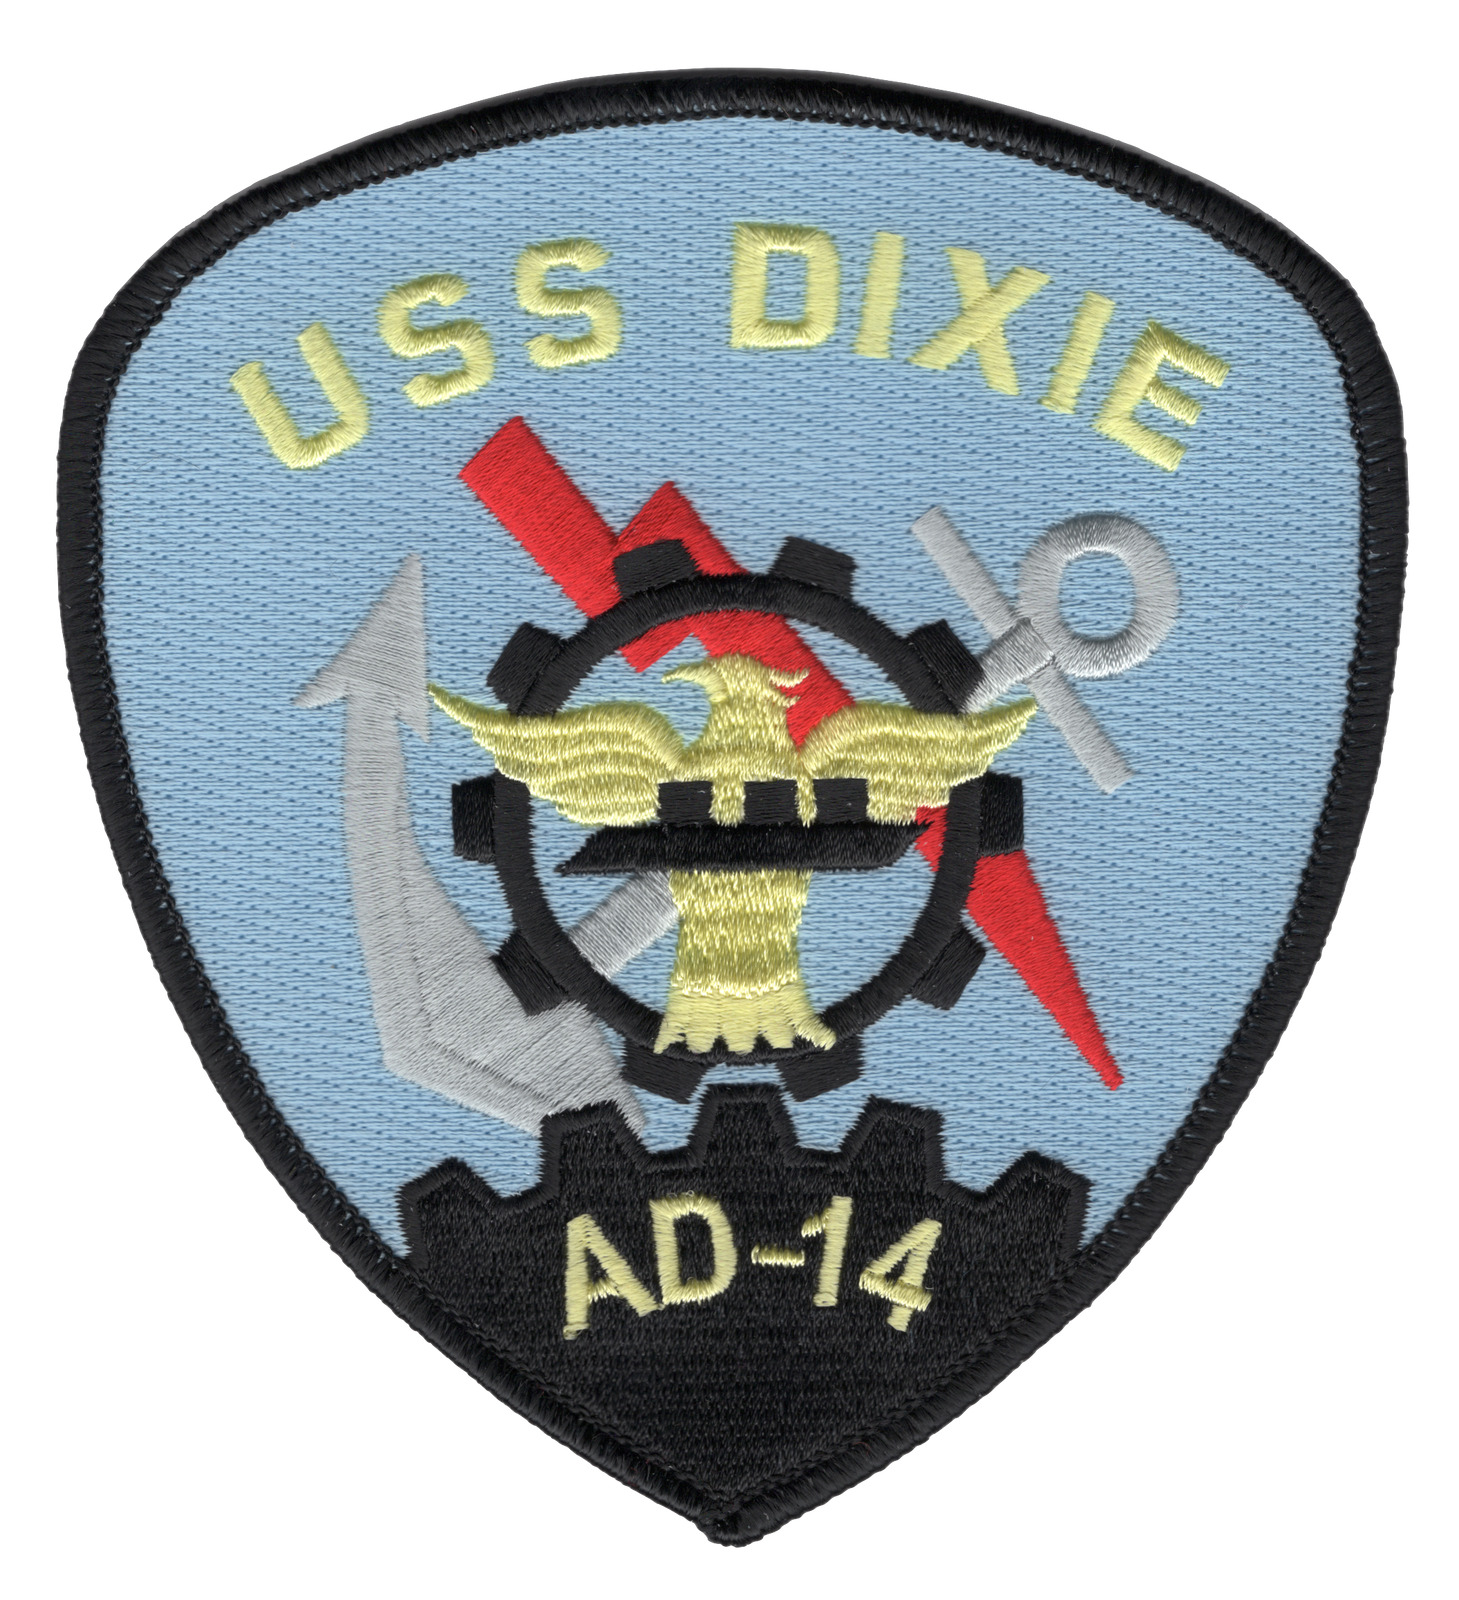 AD-14 USS Dixie Patch